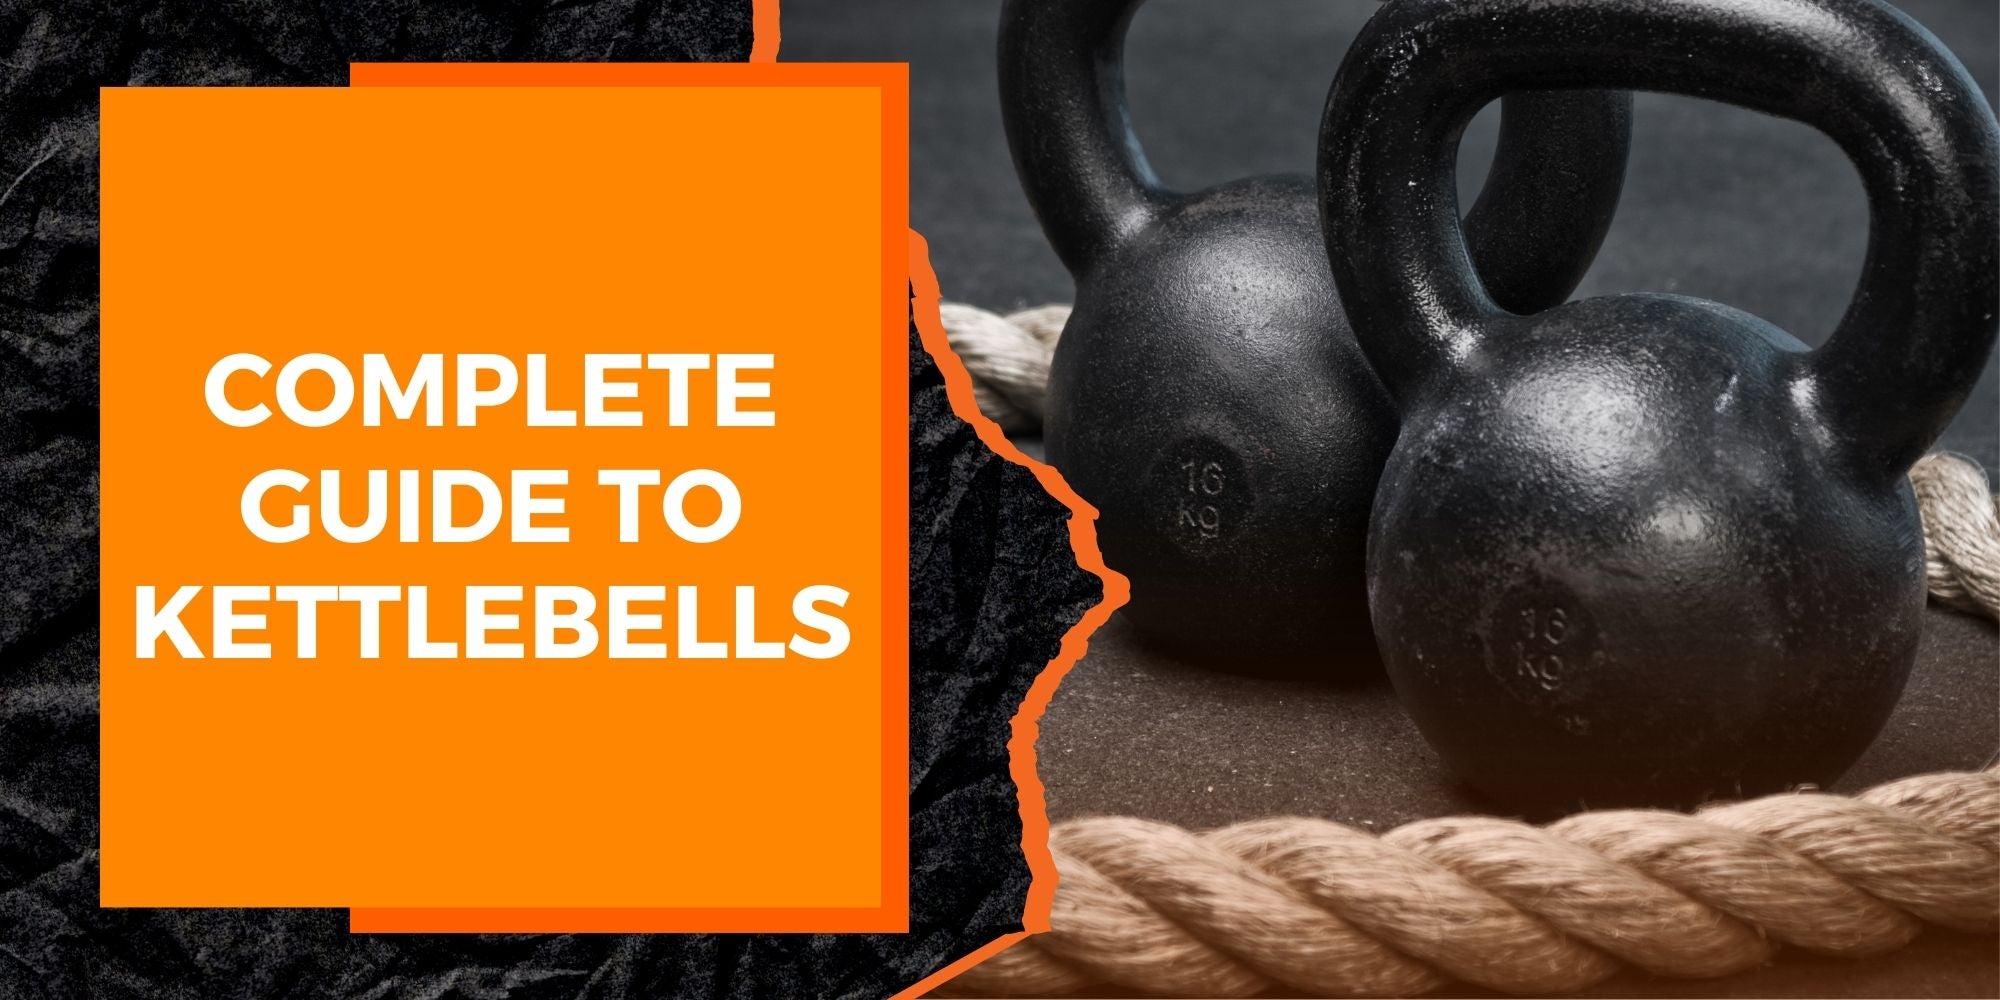 A Comprehensive Guide to Kettlebells